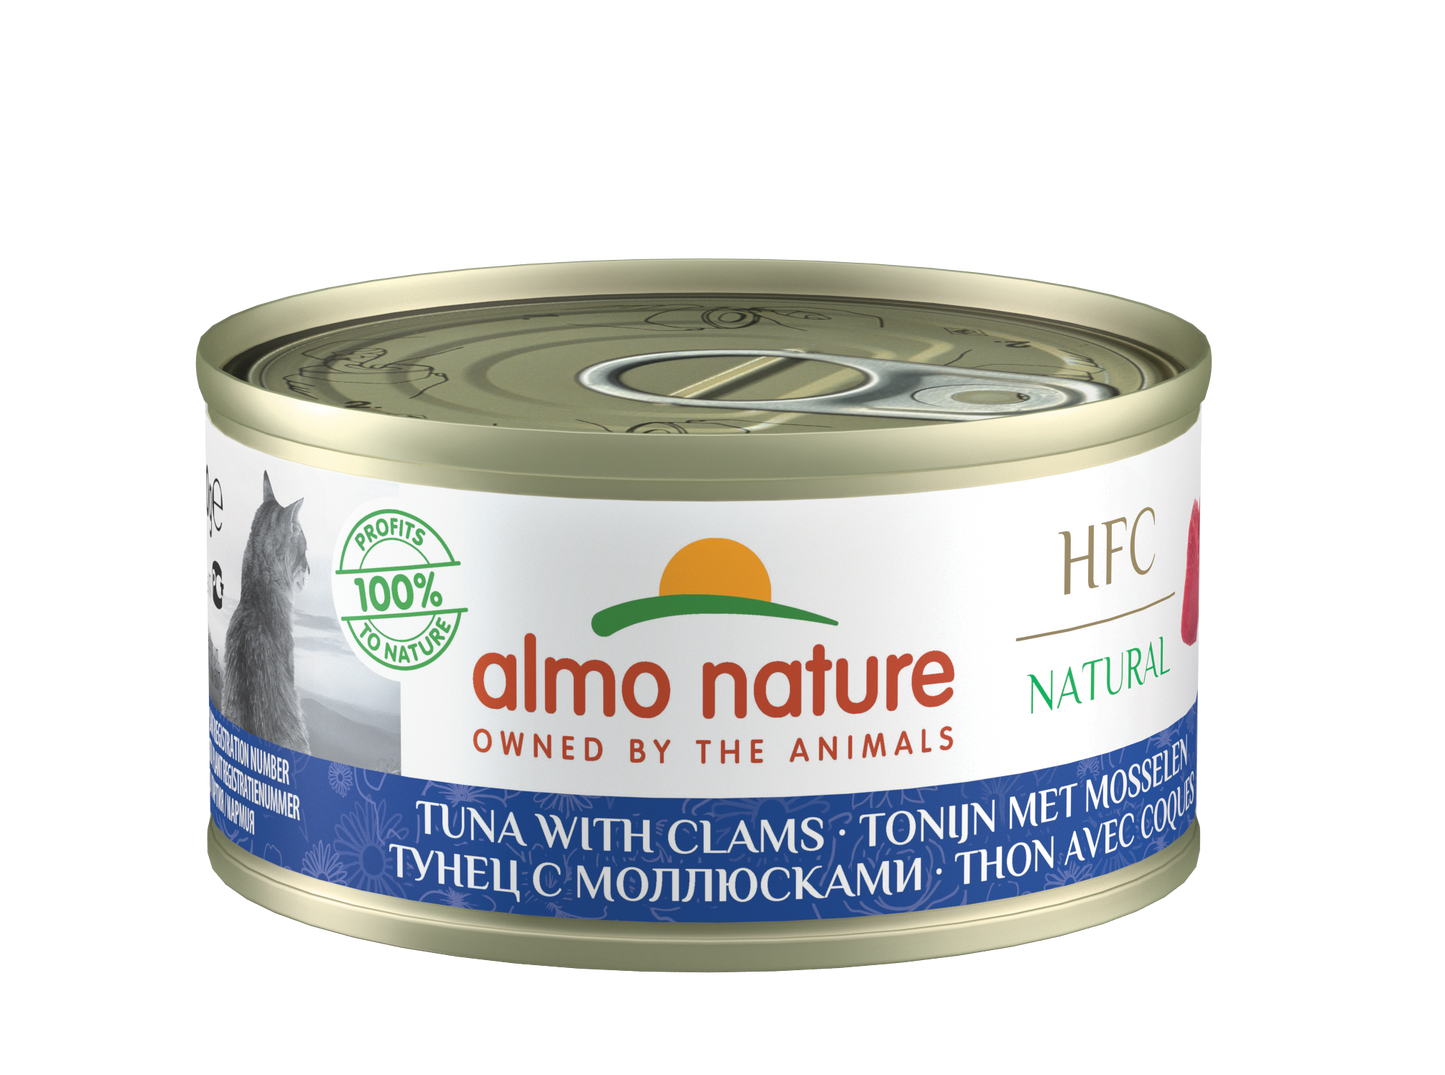 Almo Nature HFC Natural Canned Cat Food – Tuna with Clams, 70g